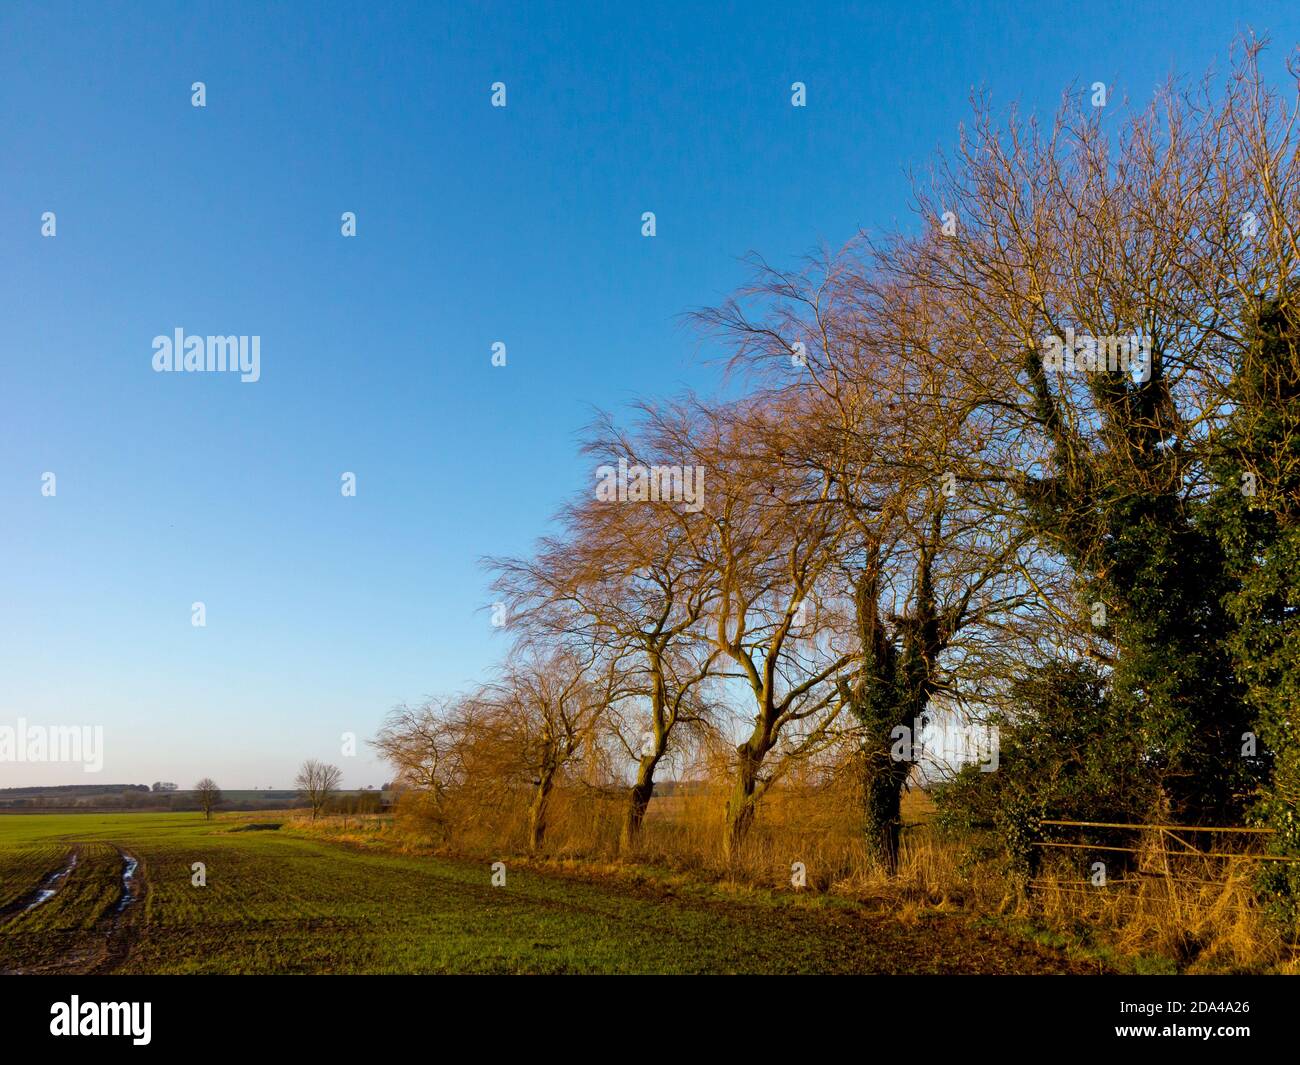 Corner of a field near West Ashby in Lincolnshire England UK used for growing arable crops with trees on one side of the frame. Stock Photo